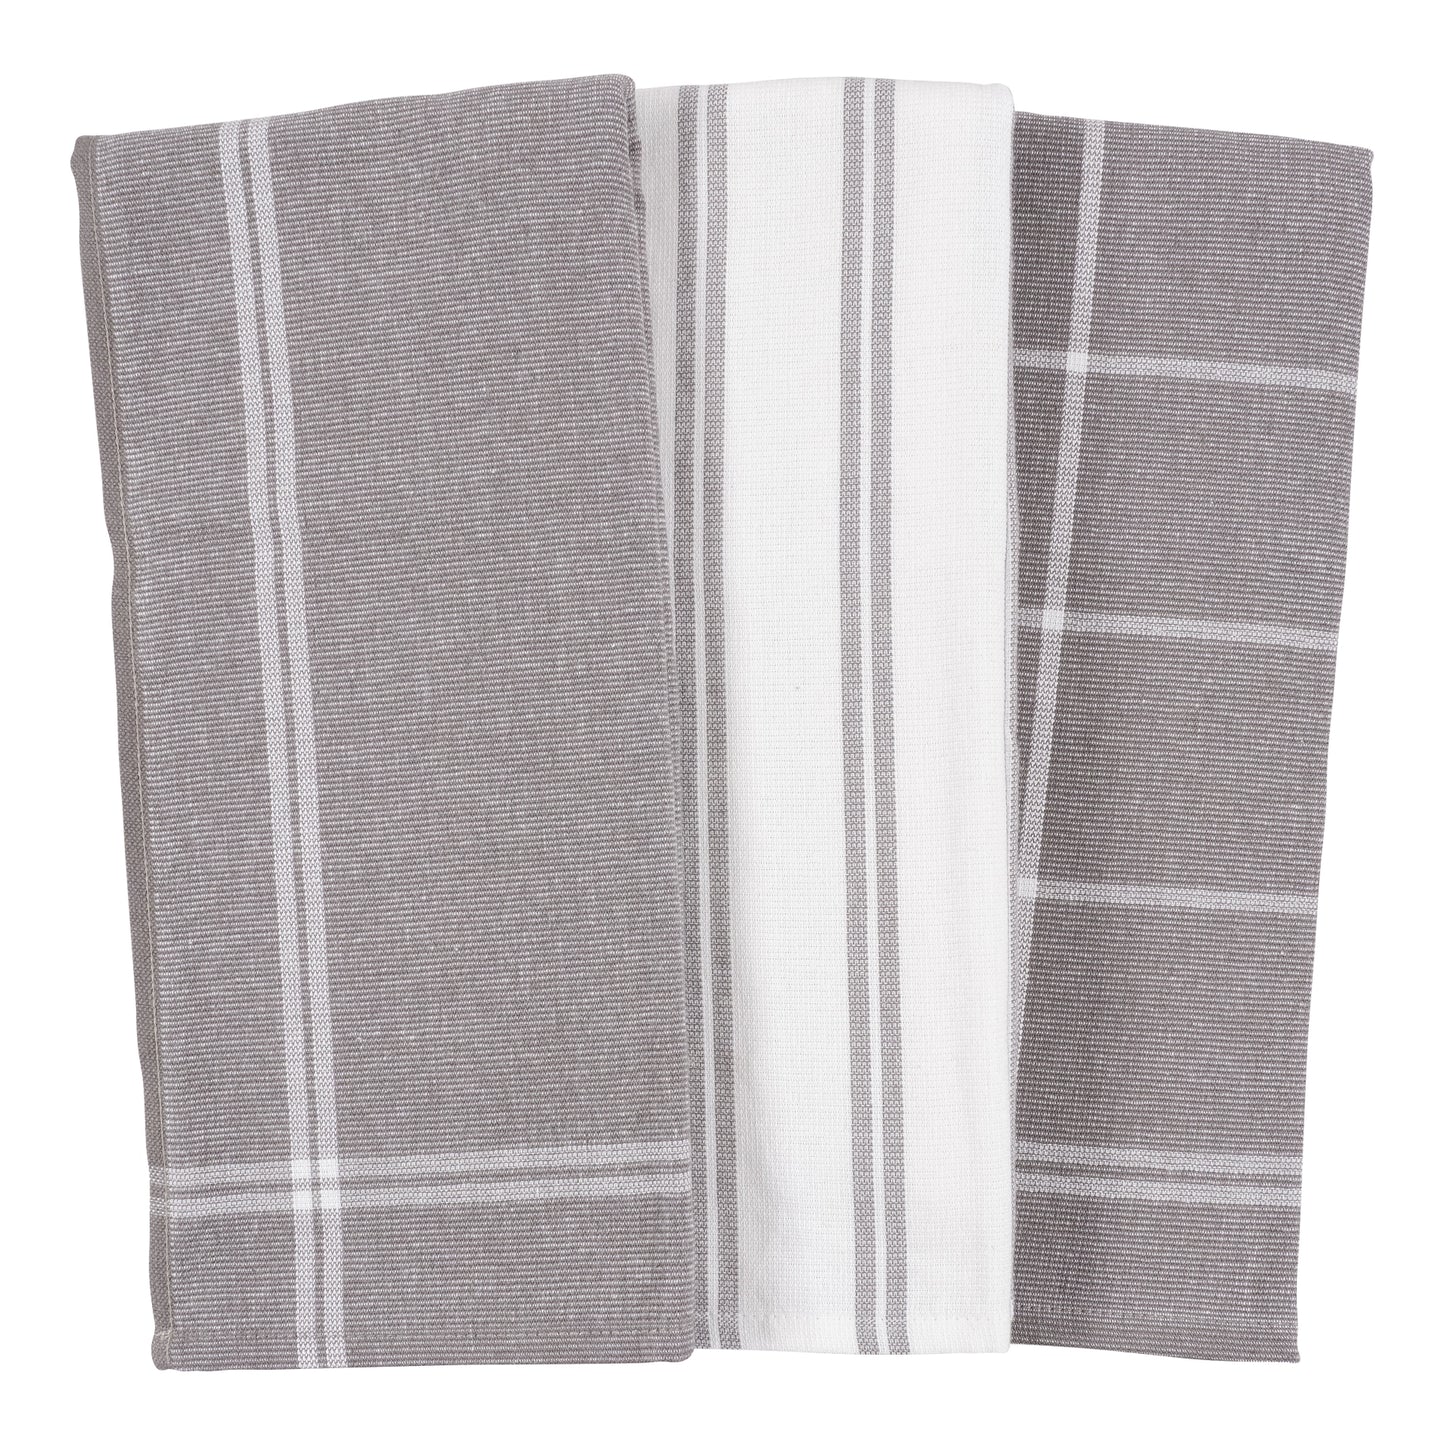 Canopy Kitchen Towels, Set of 3